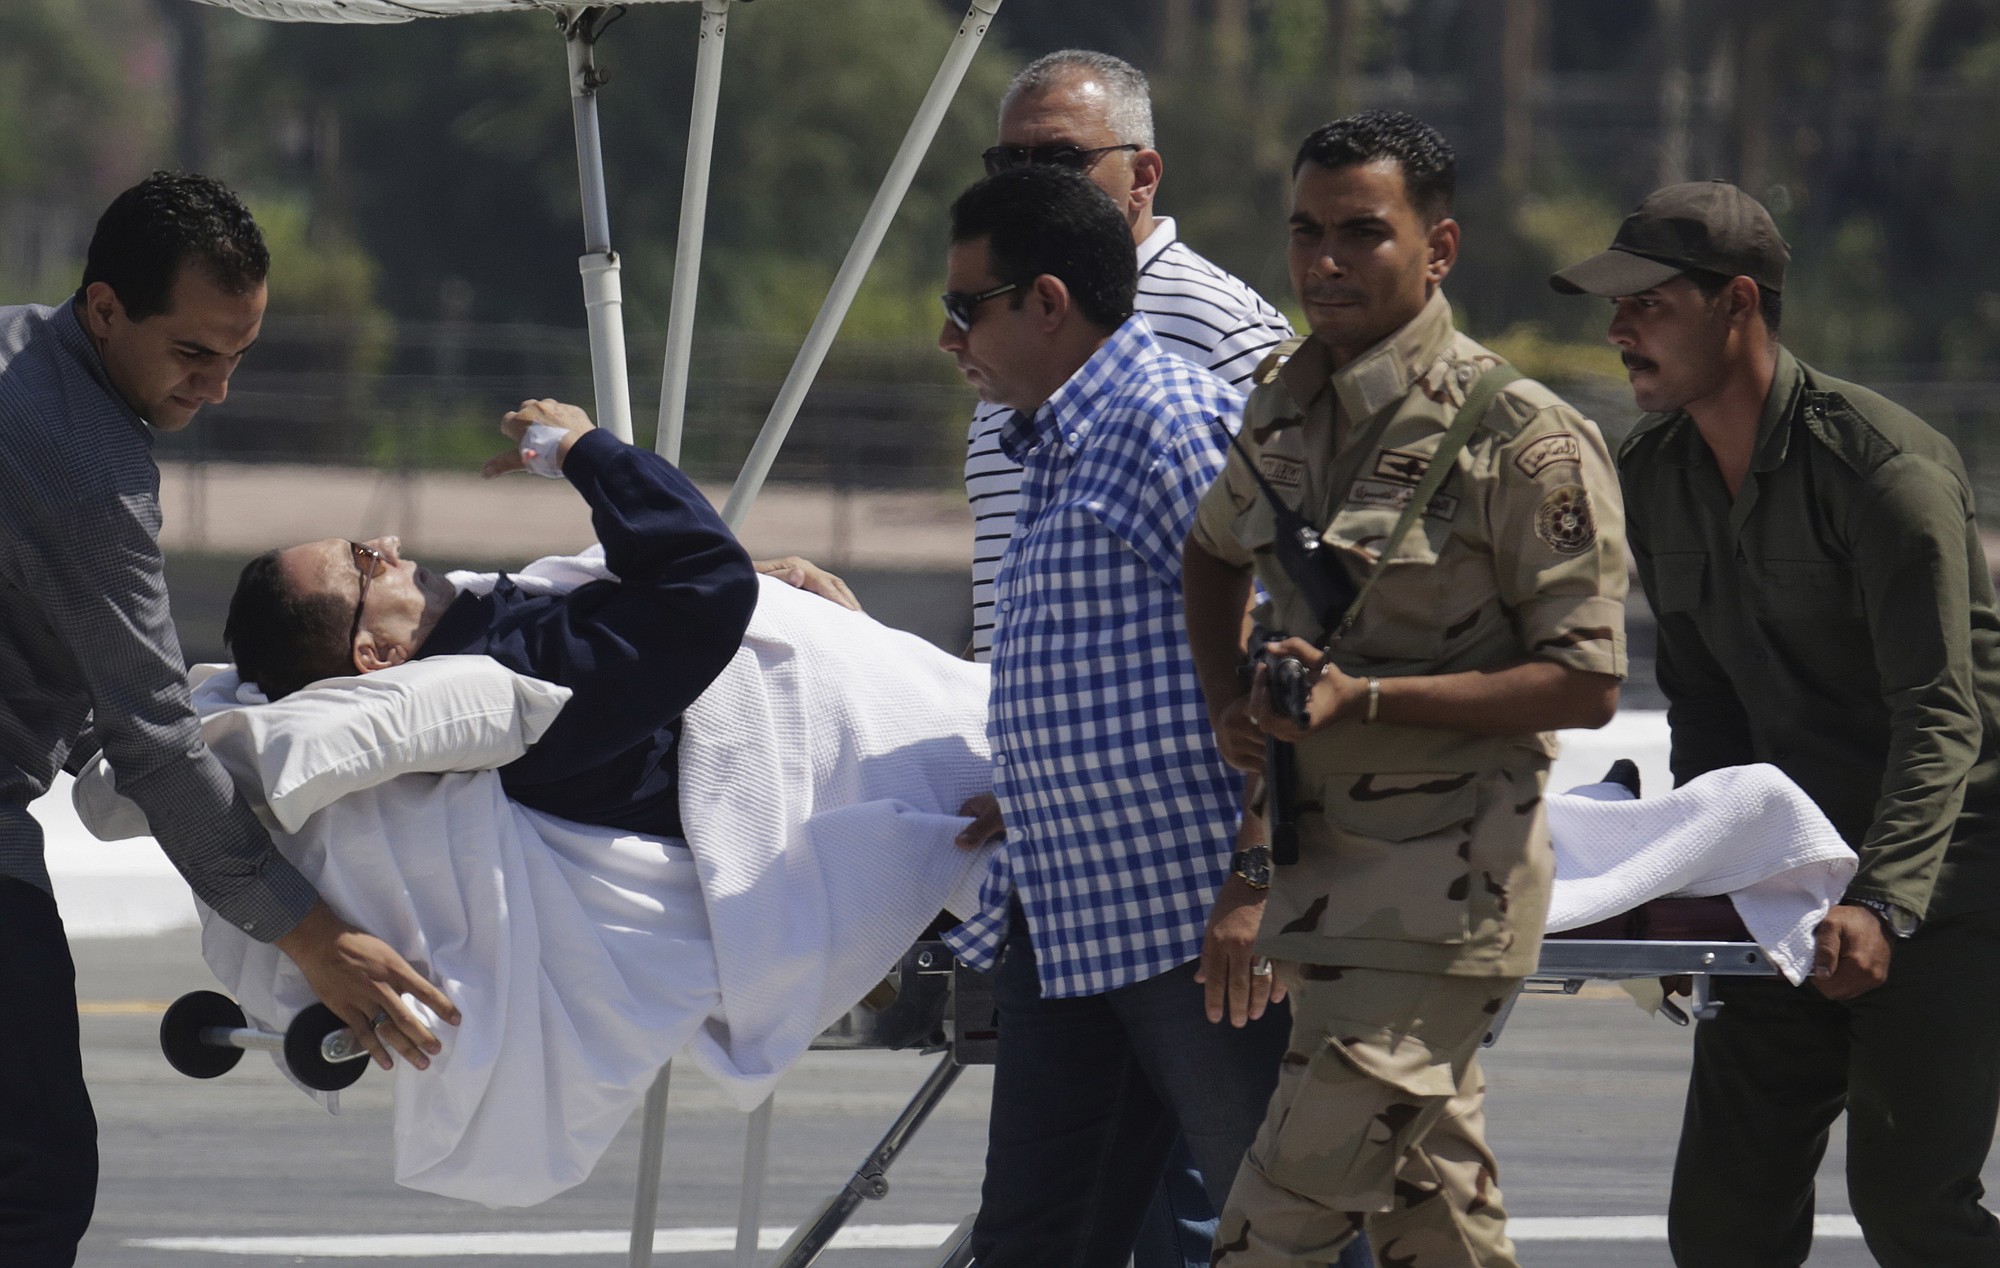 Egyptian medics and army personnel escort former Egyptian President Hosni Mubarak, 86, from a helicopter ambulance after landing at the Maadi Military Hospital, following his retrial in Cairo, Egypt, Wednesday, Aug. 13, 2014. Egypt's deposed President Mubarak on Wednesday denied that he ordered protesters killed during an uprising in 2011, in his first lengthy speech to a court as his year-old retrial draws to an end.